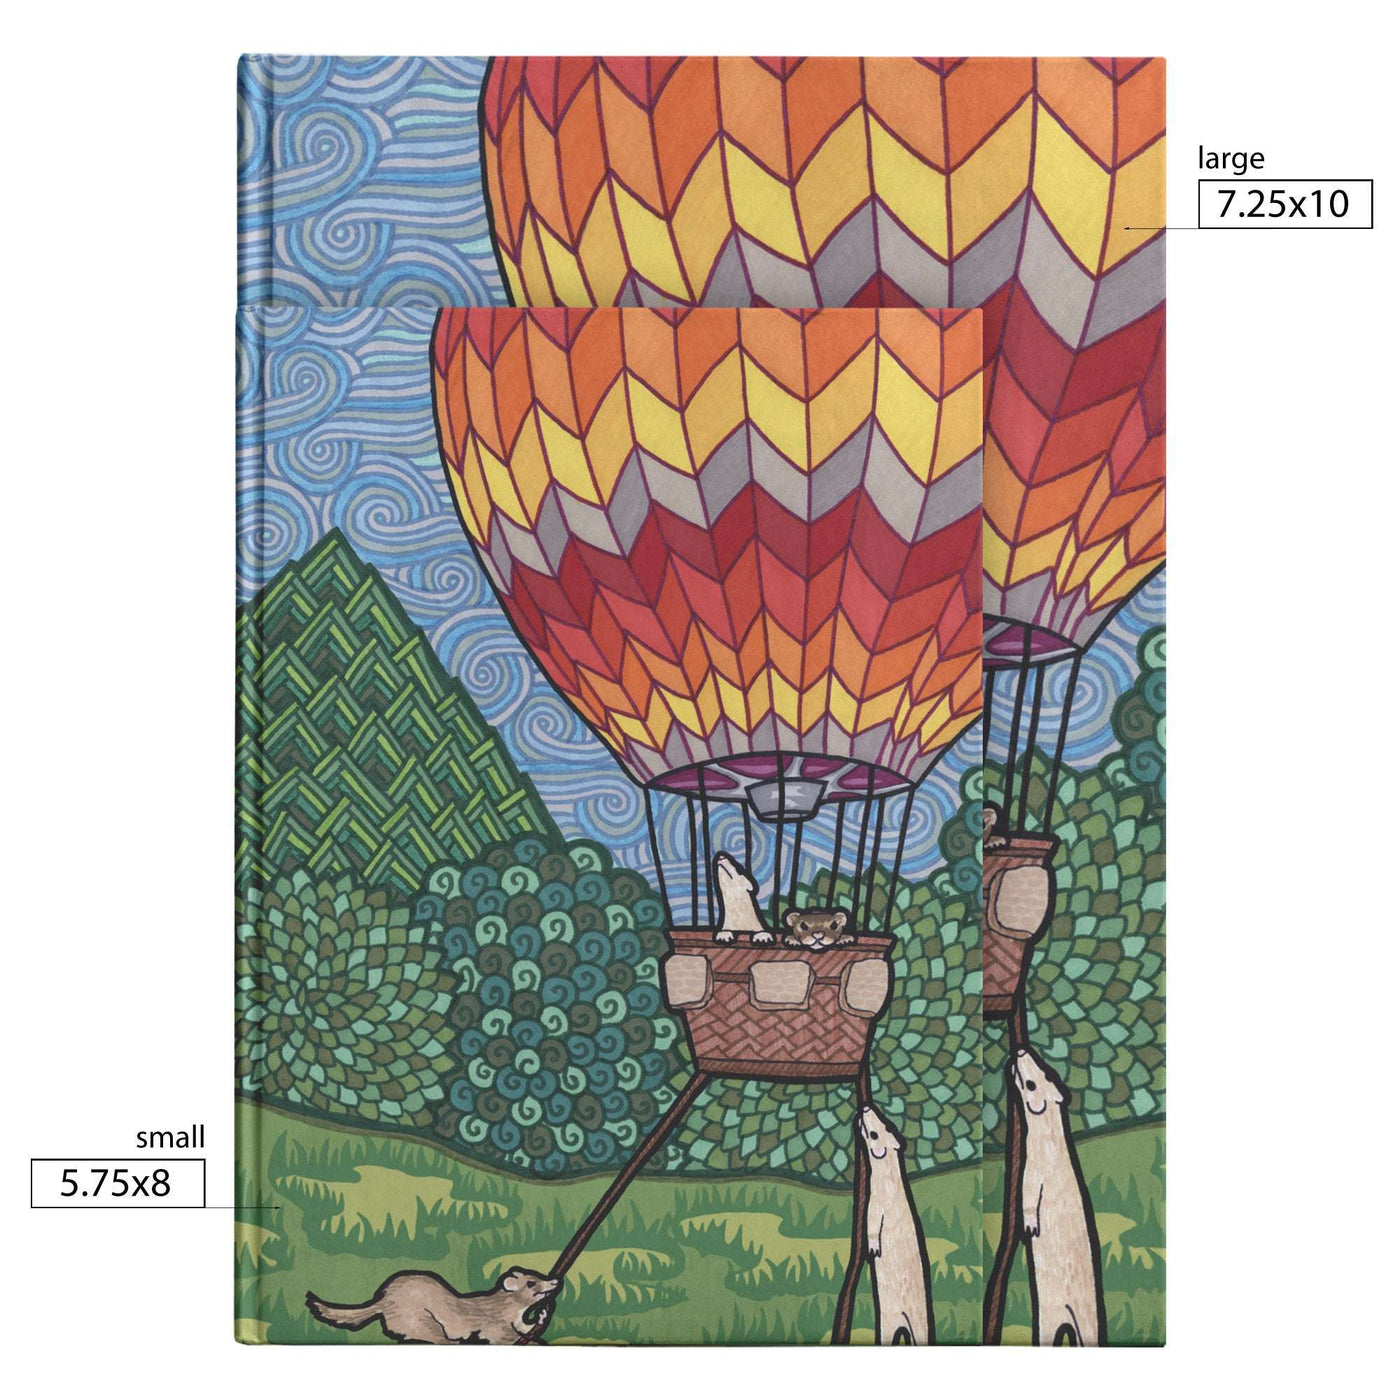 Ferret Flight Journal featuring an illustration of ferrets in a hot air balloon over a colorful landscape, with size dimensions labeled for notebook options.